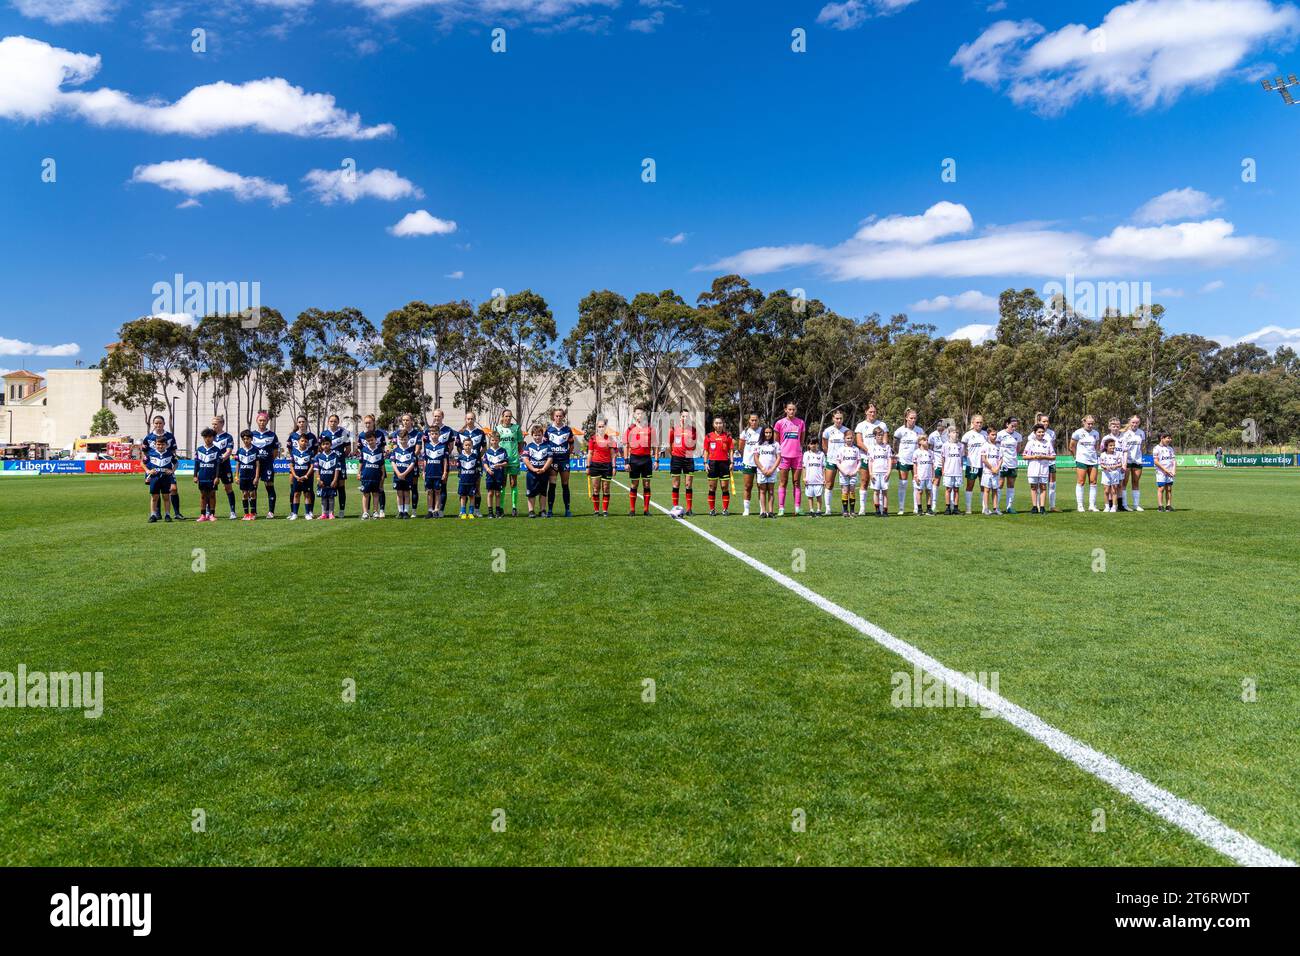 Bundoora, Australia. 12 November, 2023. The teams line up for a moments of silence before the start of the game for Remembrance Day. Credit: James Forrester/Alamy Live News Stock Photo